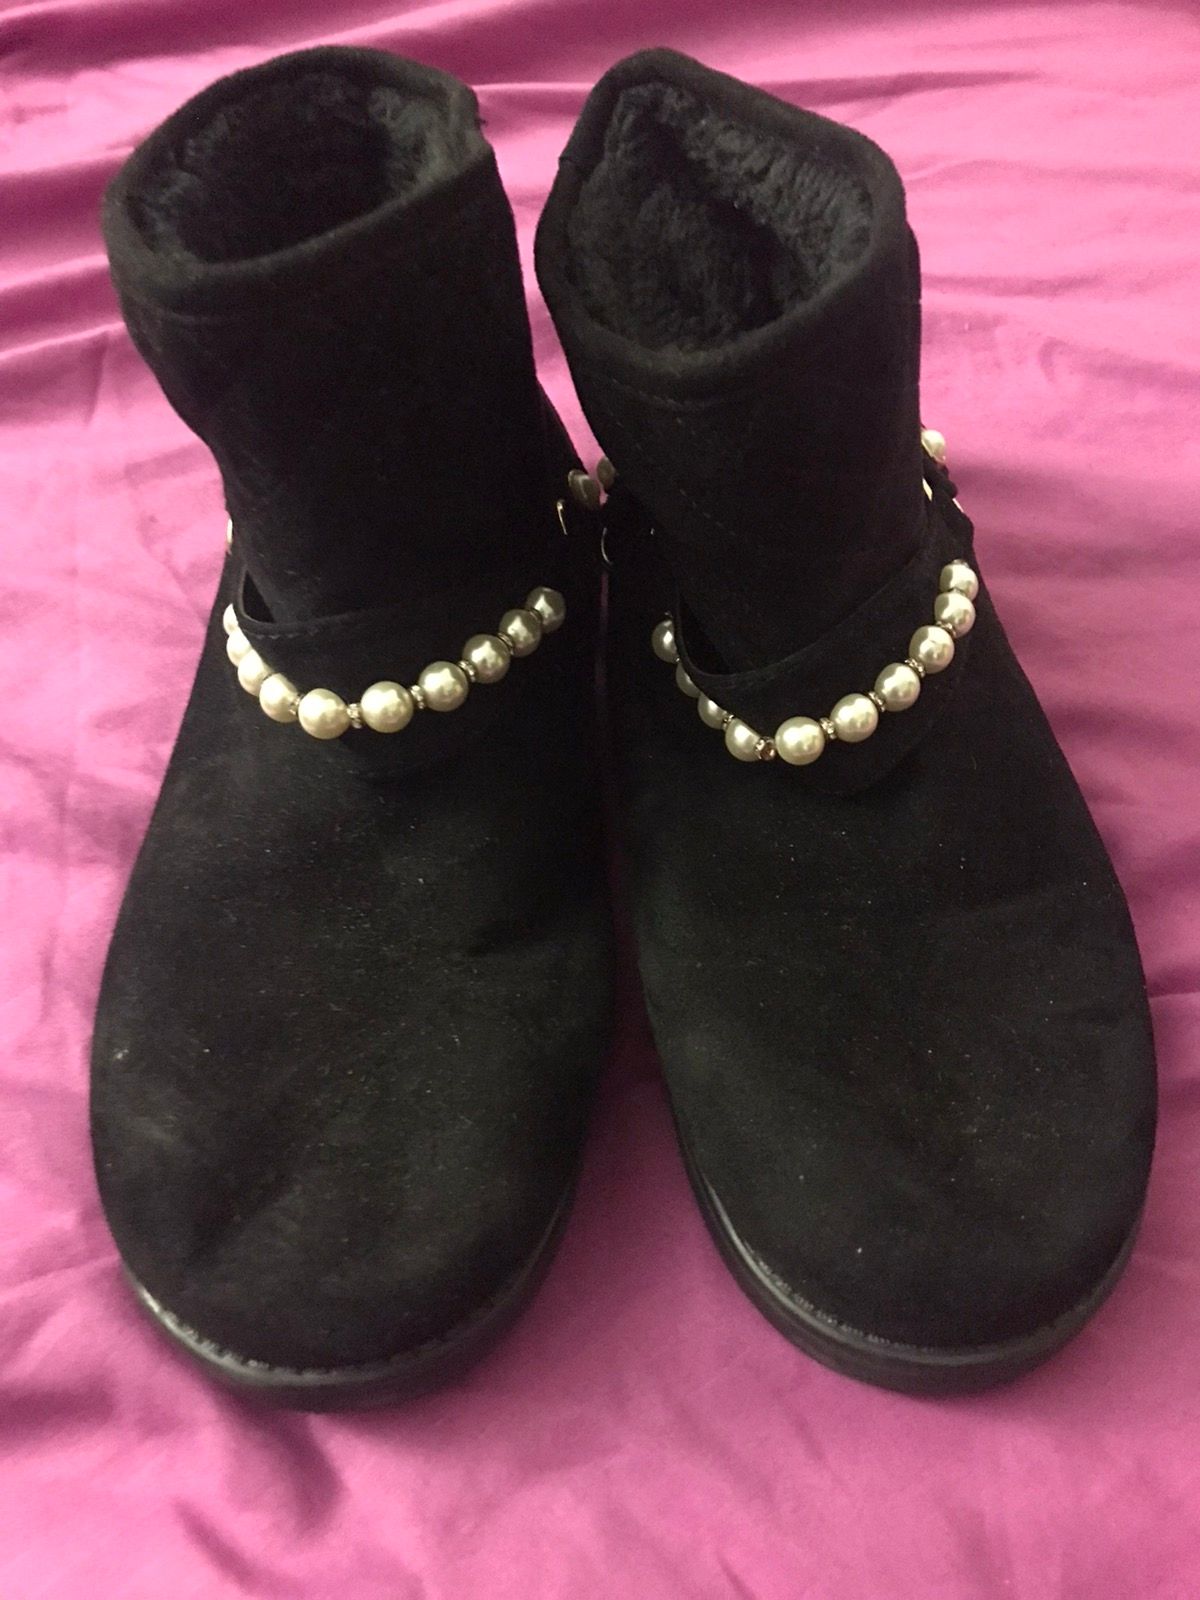 The Unbranded Brand Women’s Winter Boots With Fur & Beads Size US 10 / IT 40 - 1 Preview